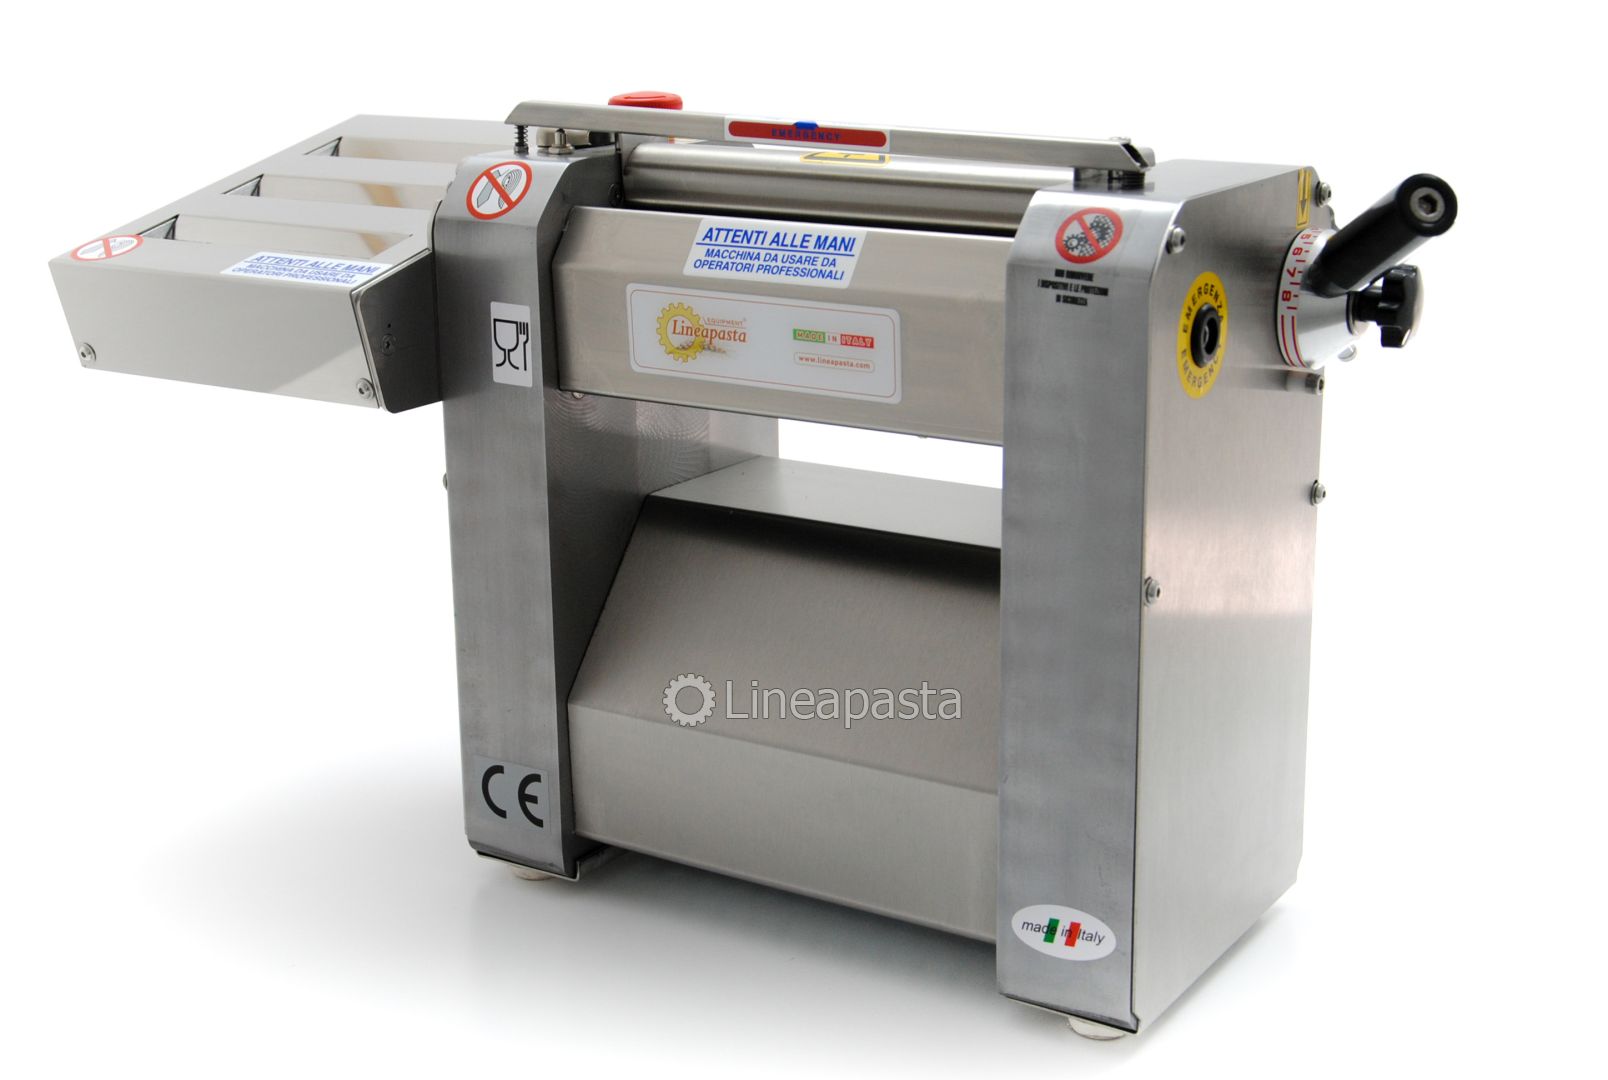 Electric fresh pasta sheeter SR with steel cylinders from 250mm to 500mm